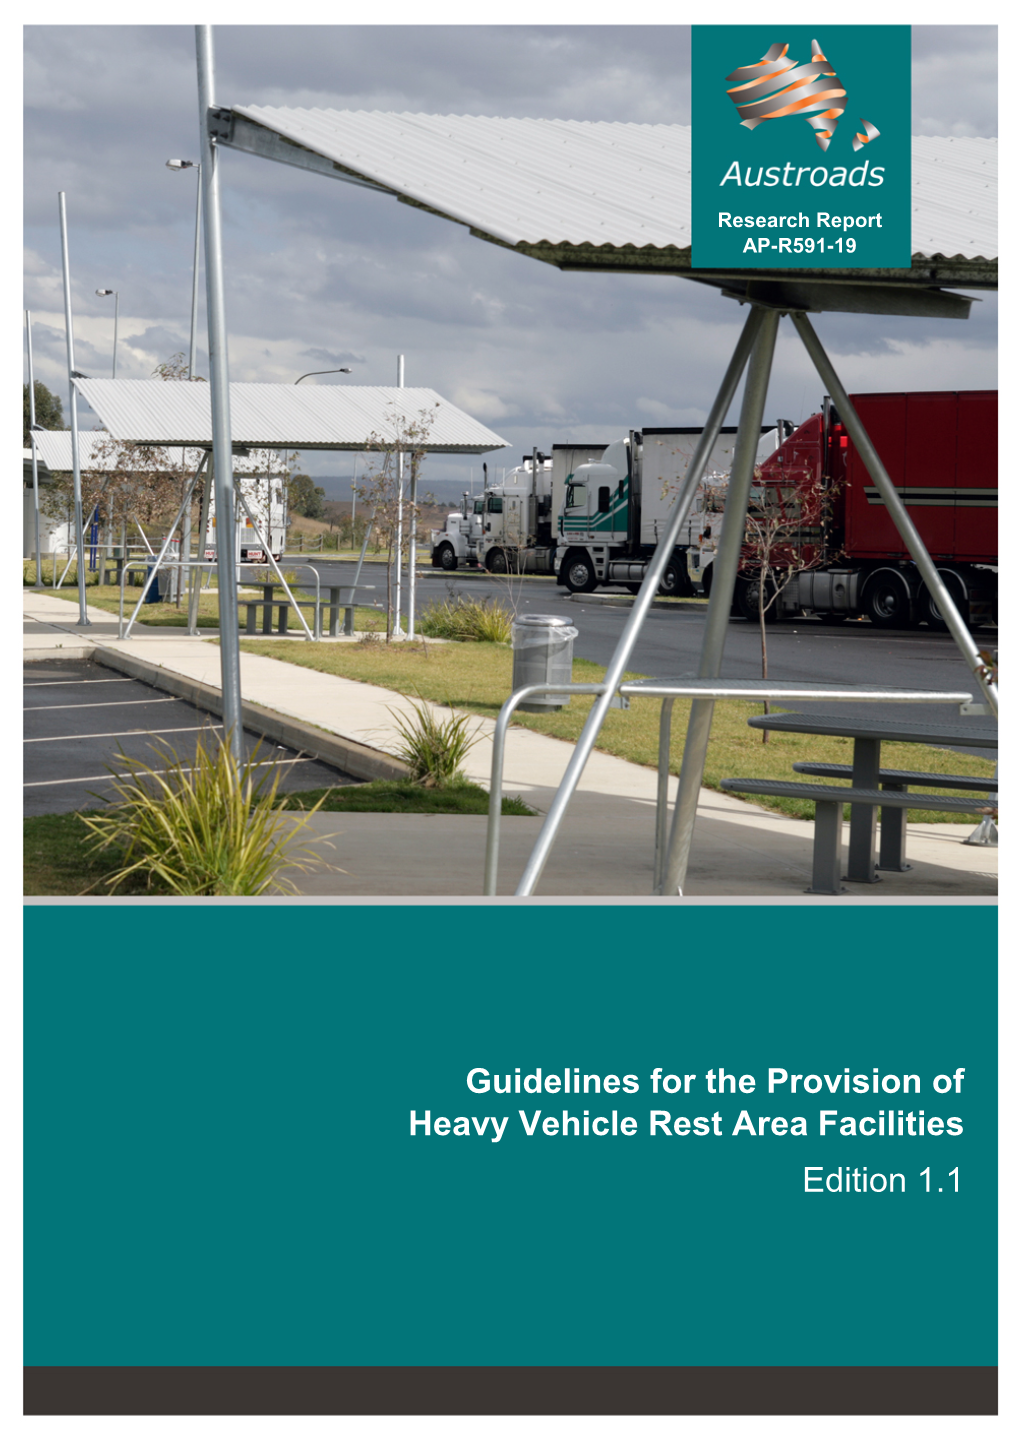 Guidelines for the Provision of Heavy Vehicle Rest Area Facilities (Edition 1.1)